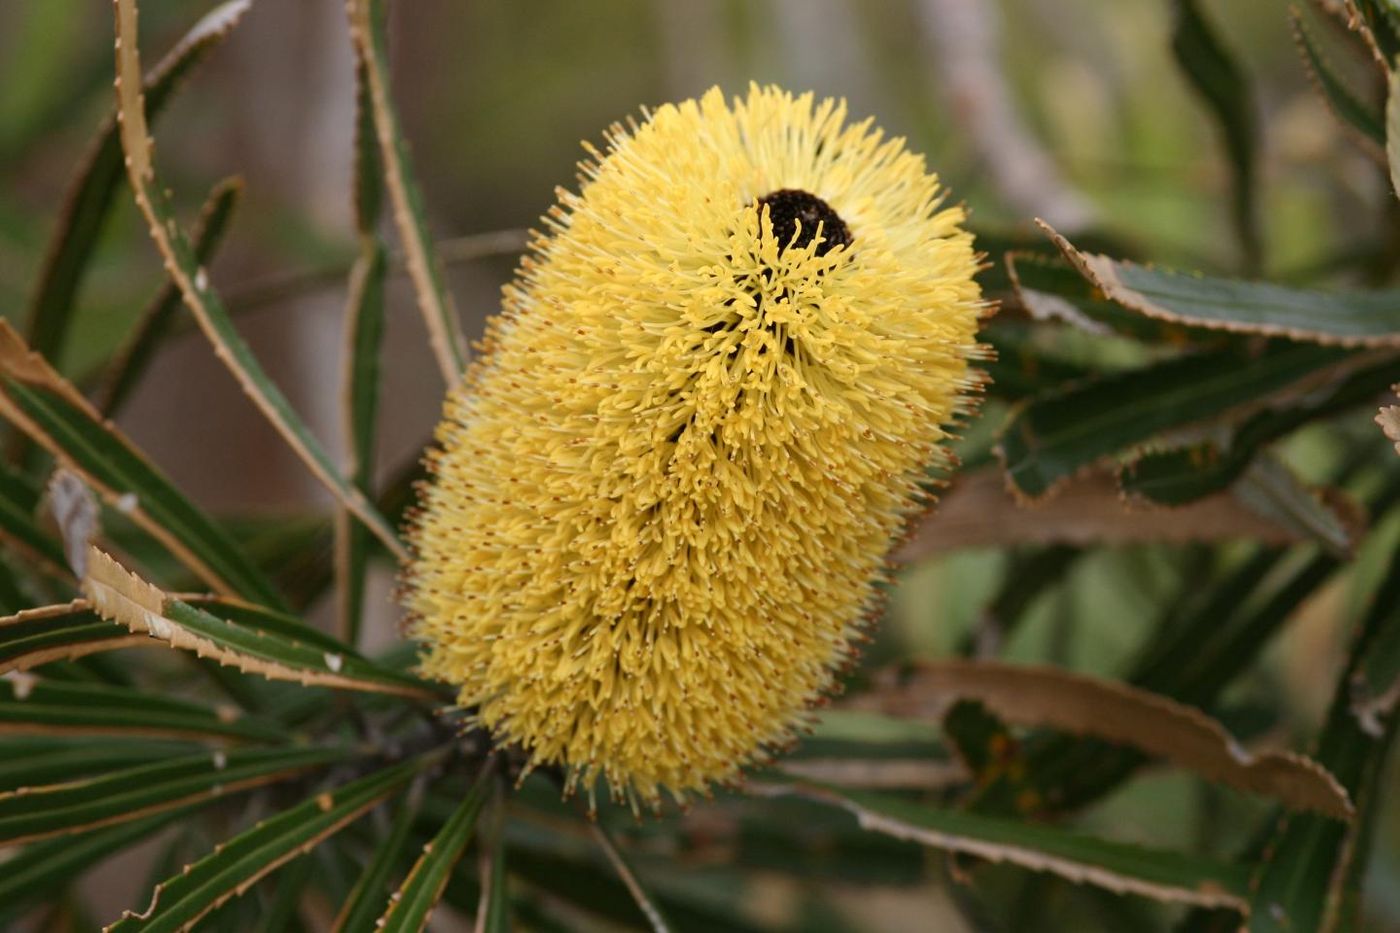 This is Banksia attenuata from the Jurien Bay shrublands. / Credit: Francois Teste